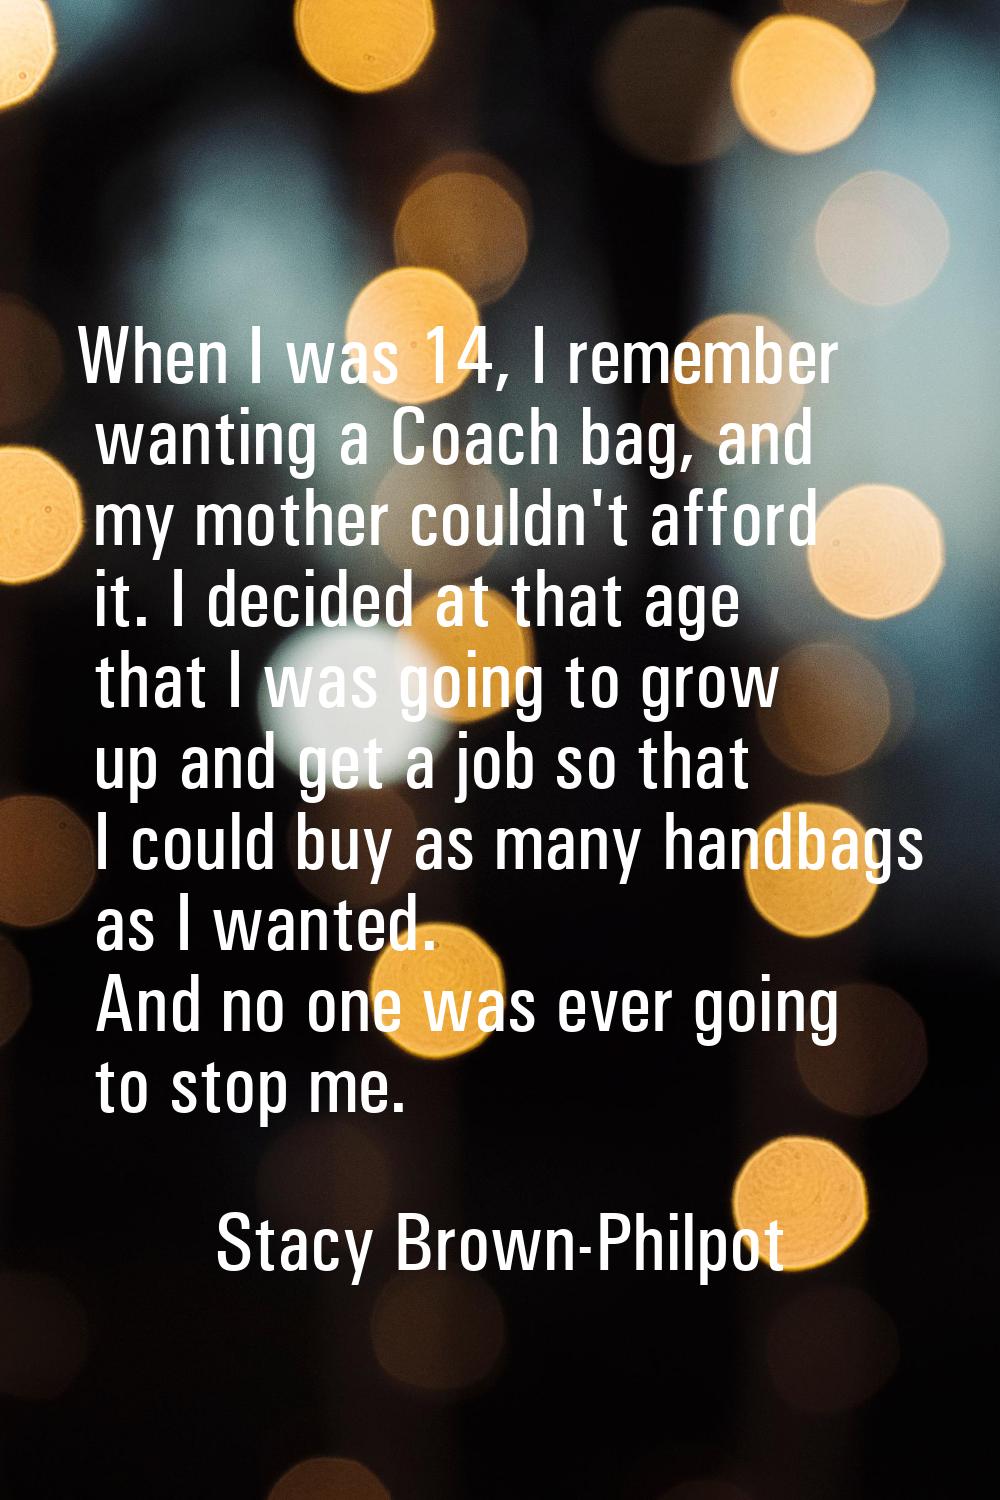 When I was 14, I remember wanting a Coach bag, and my mother couldn't afford it. I decided at that 